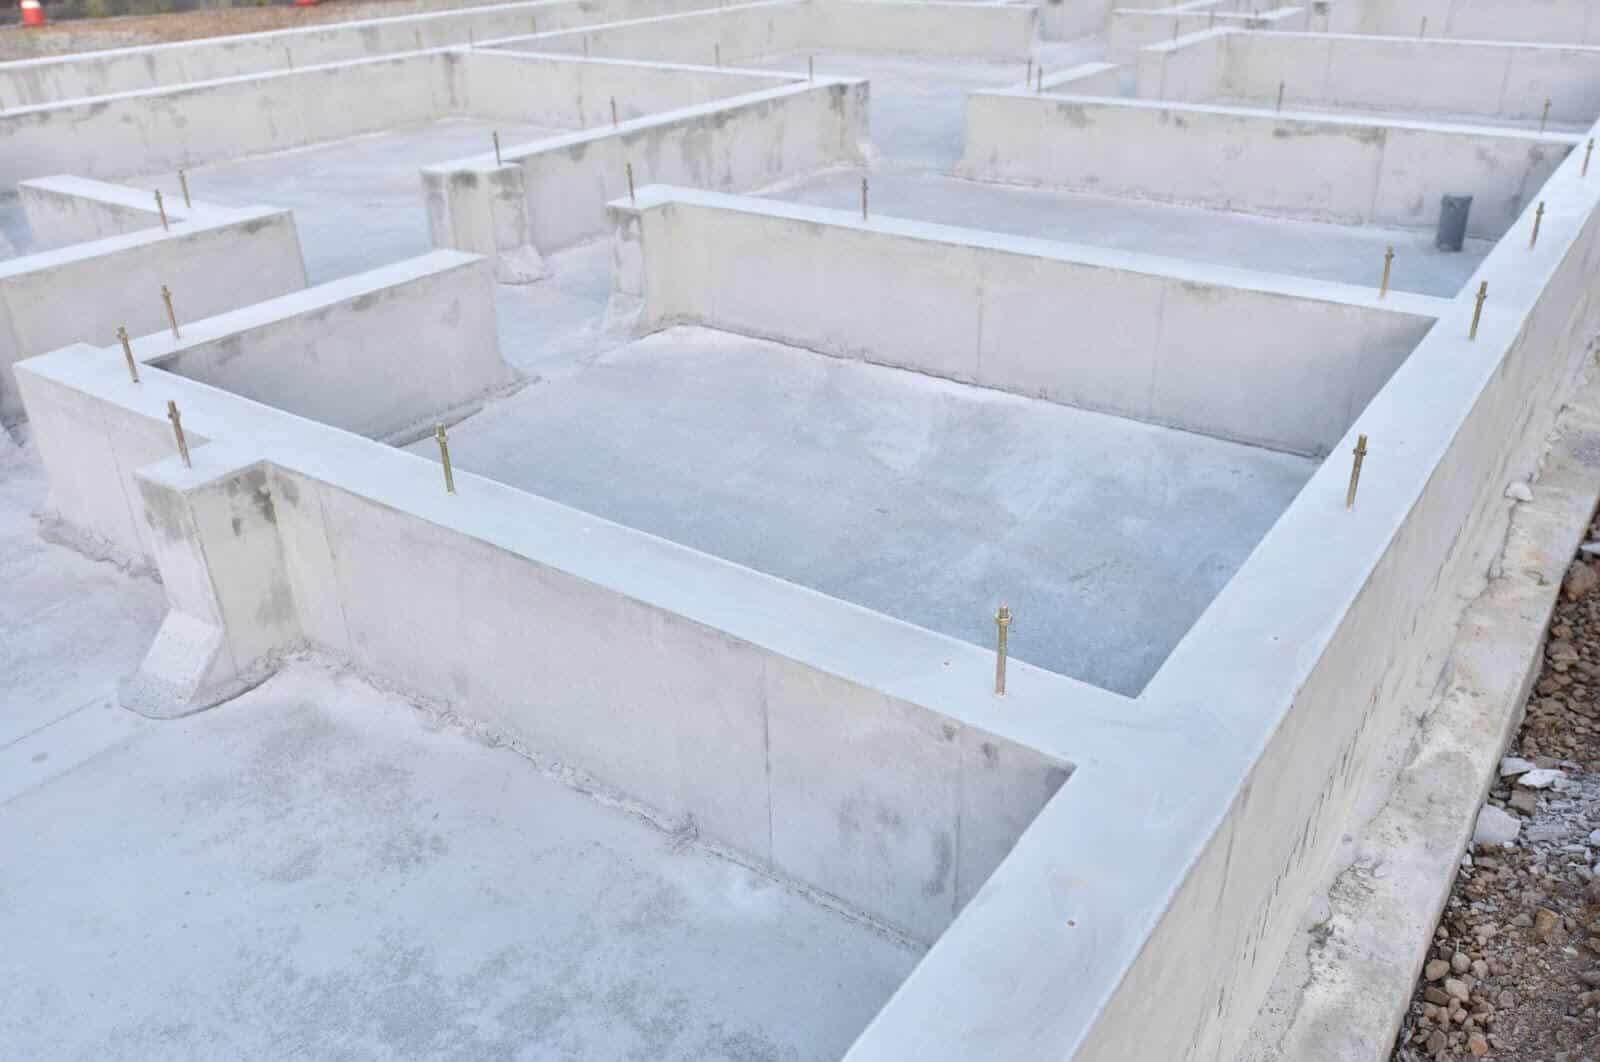 Completed concrete form